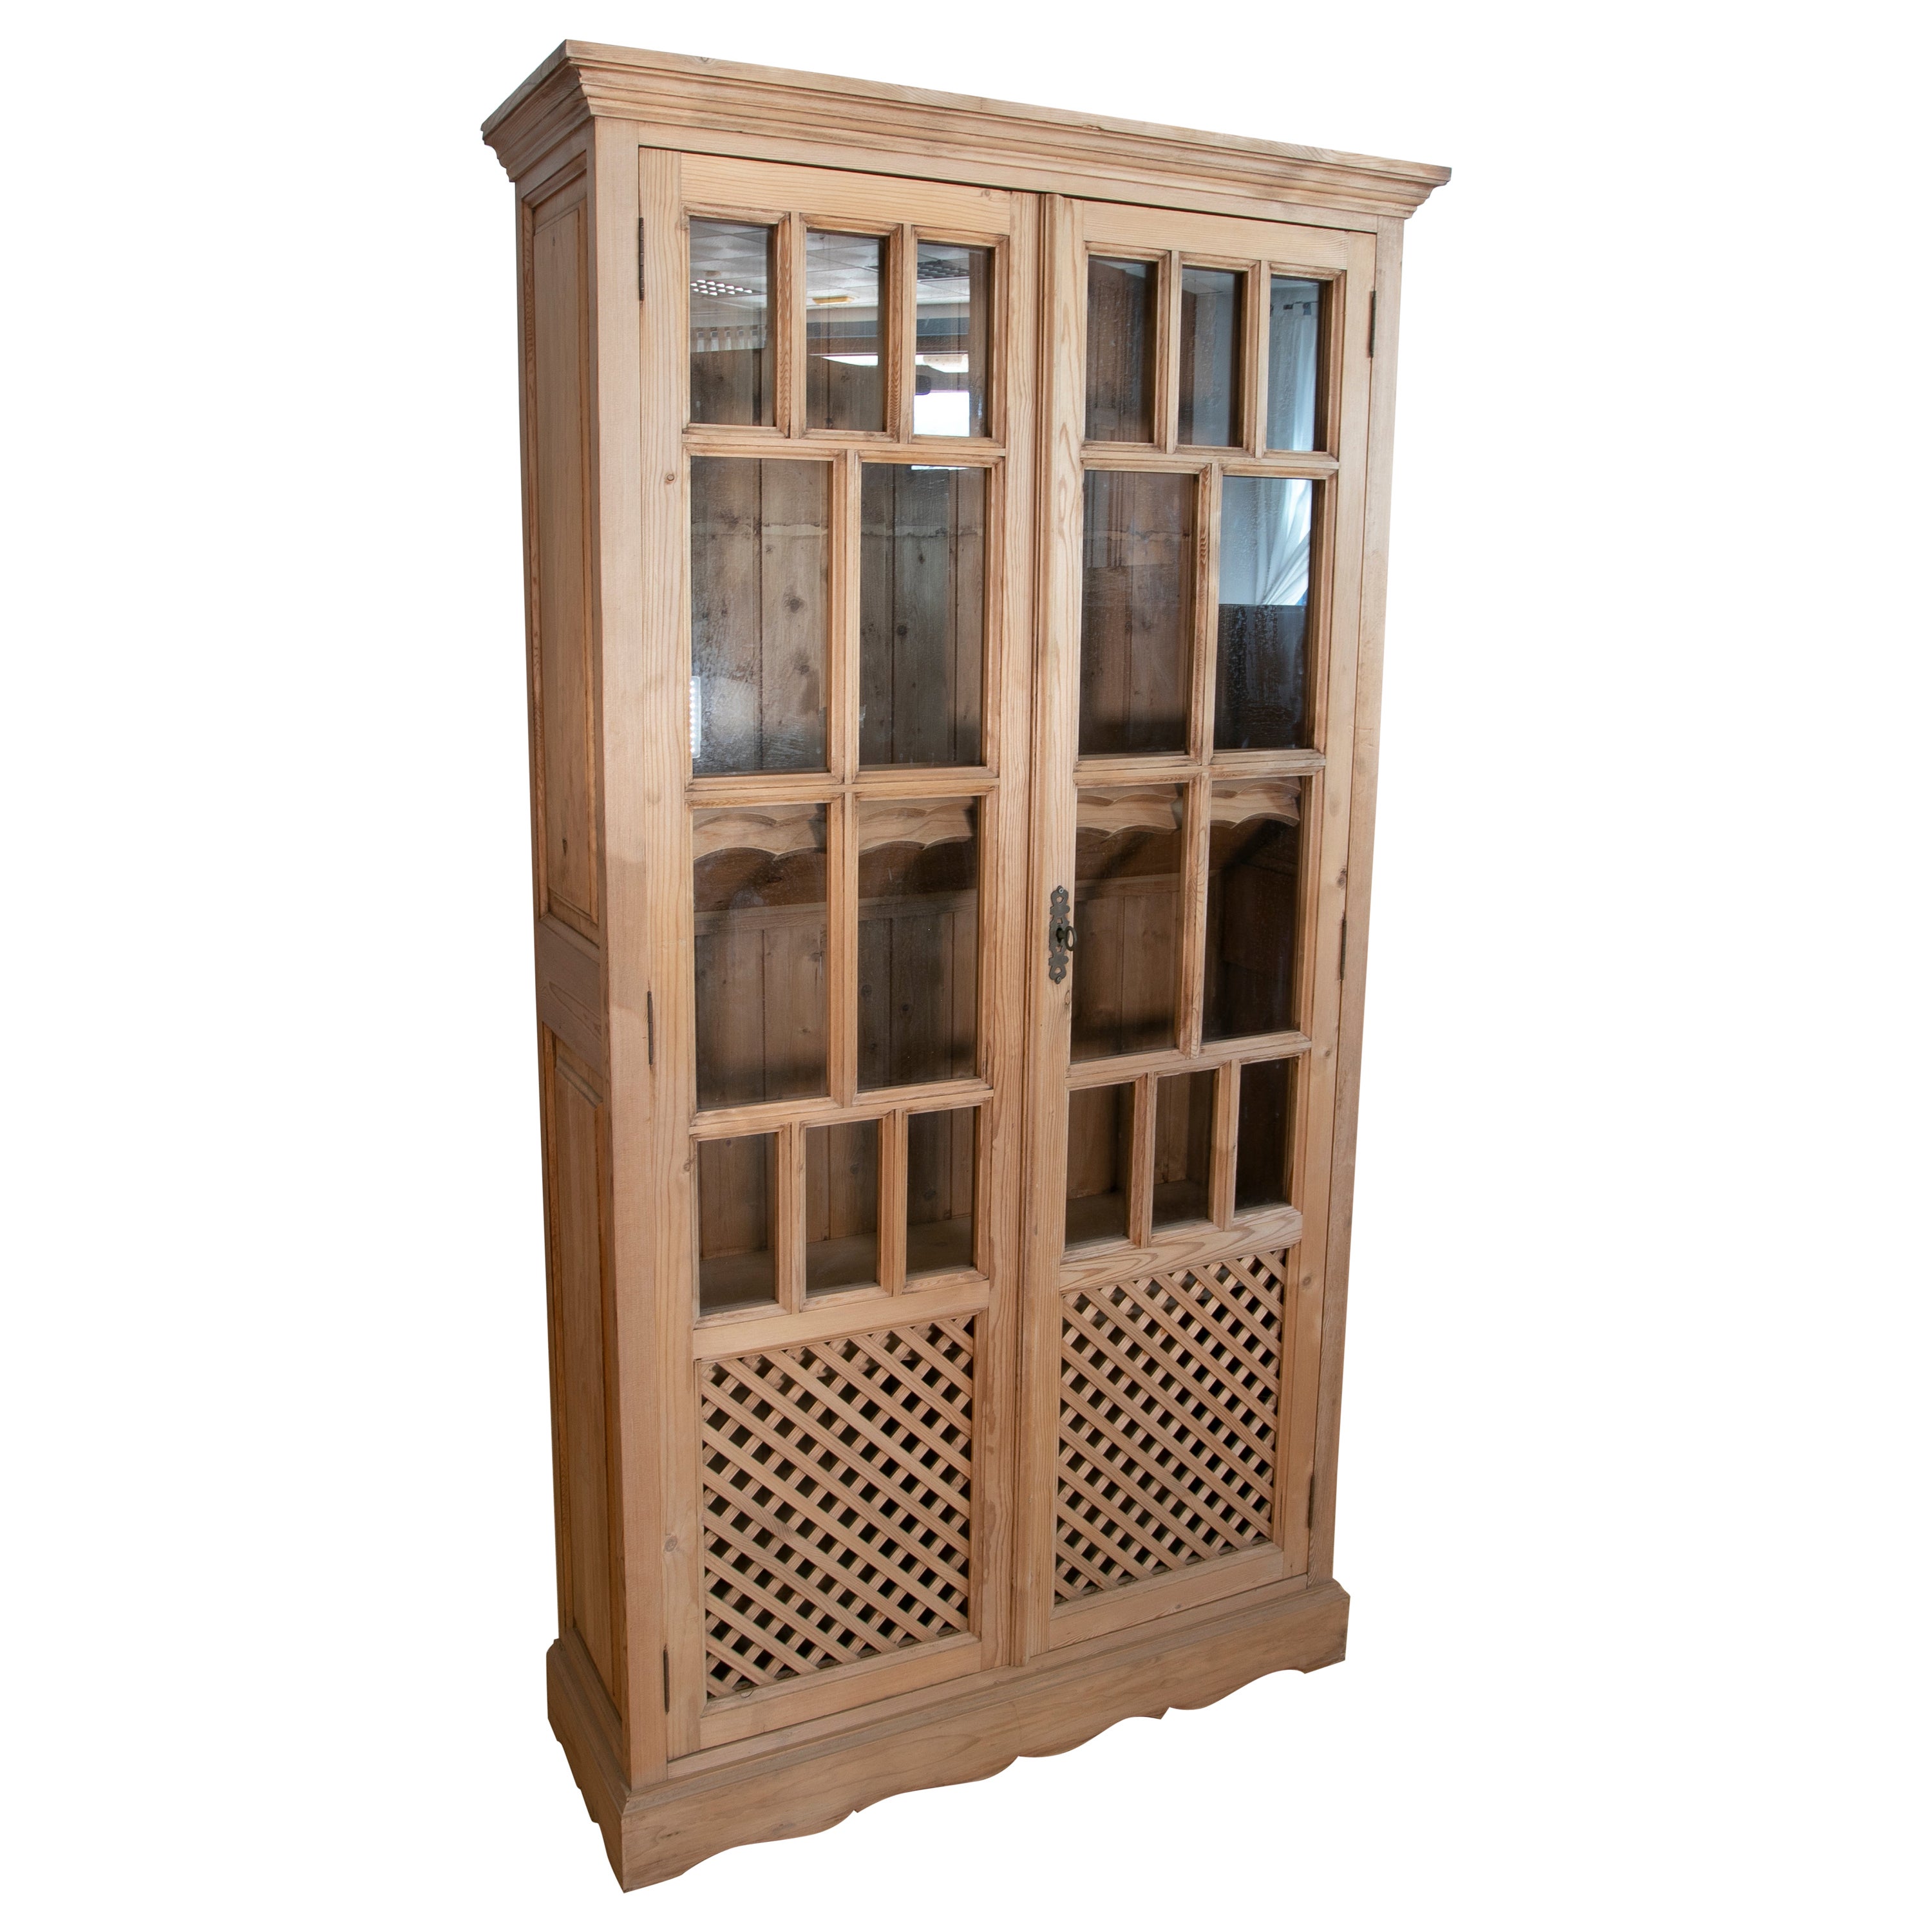 Spanish Wooden Cabinet with Glass Doors and Latticework